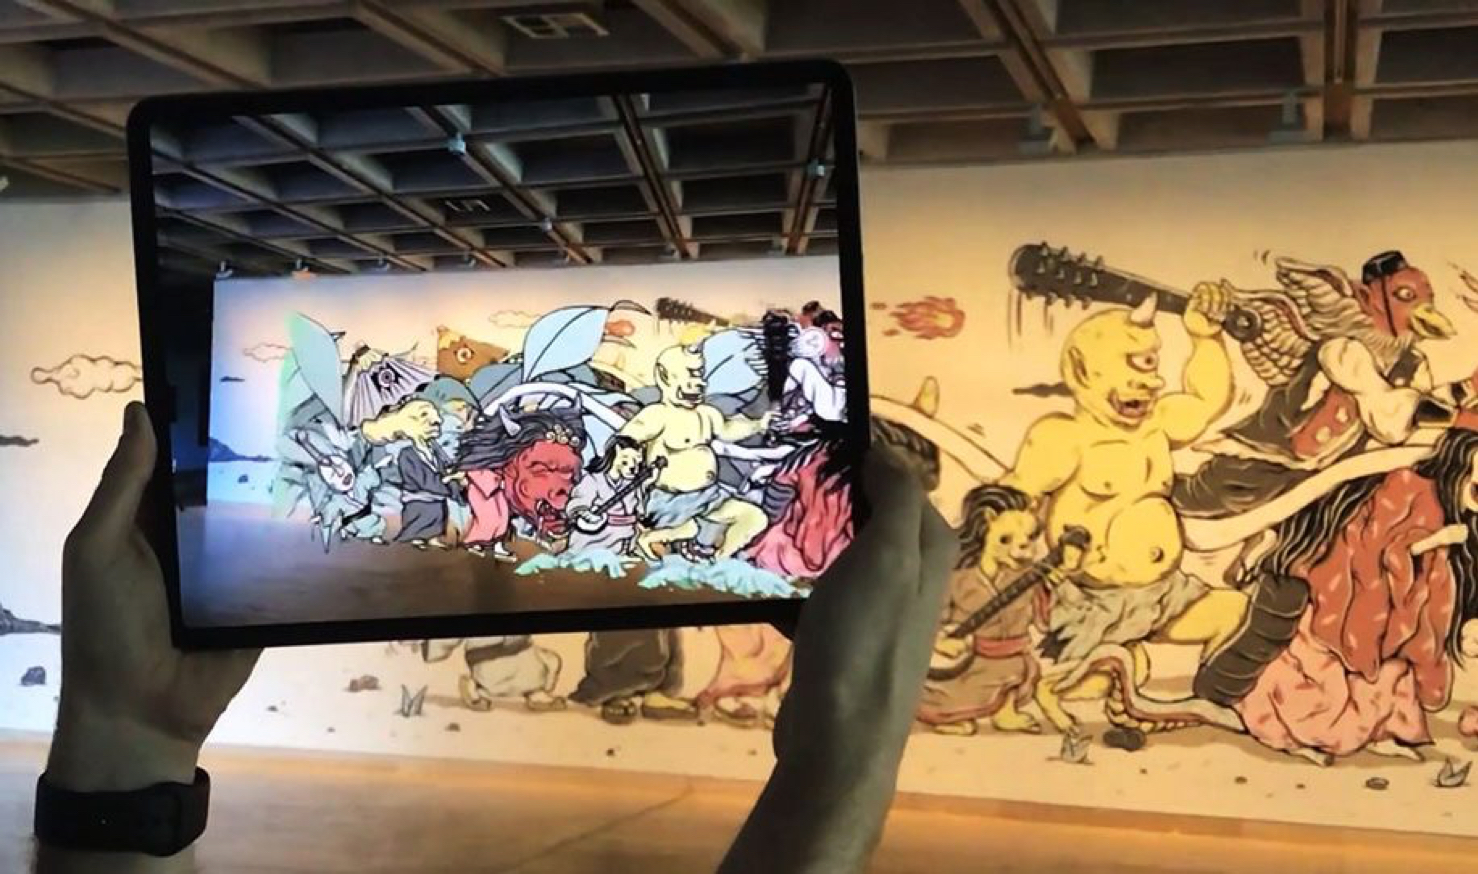 Augmented Reality App showing mural artwork